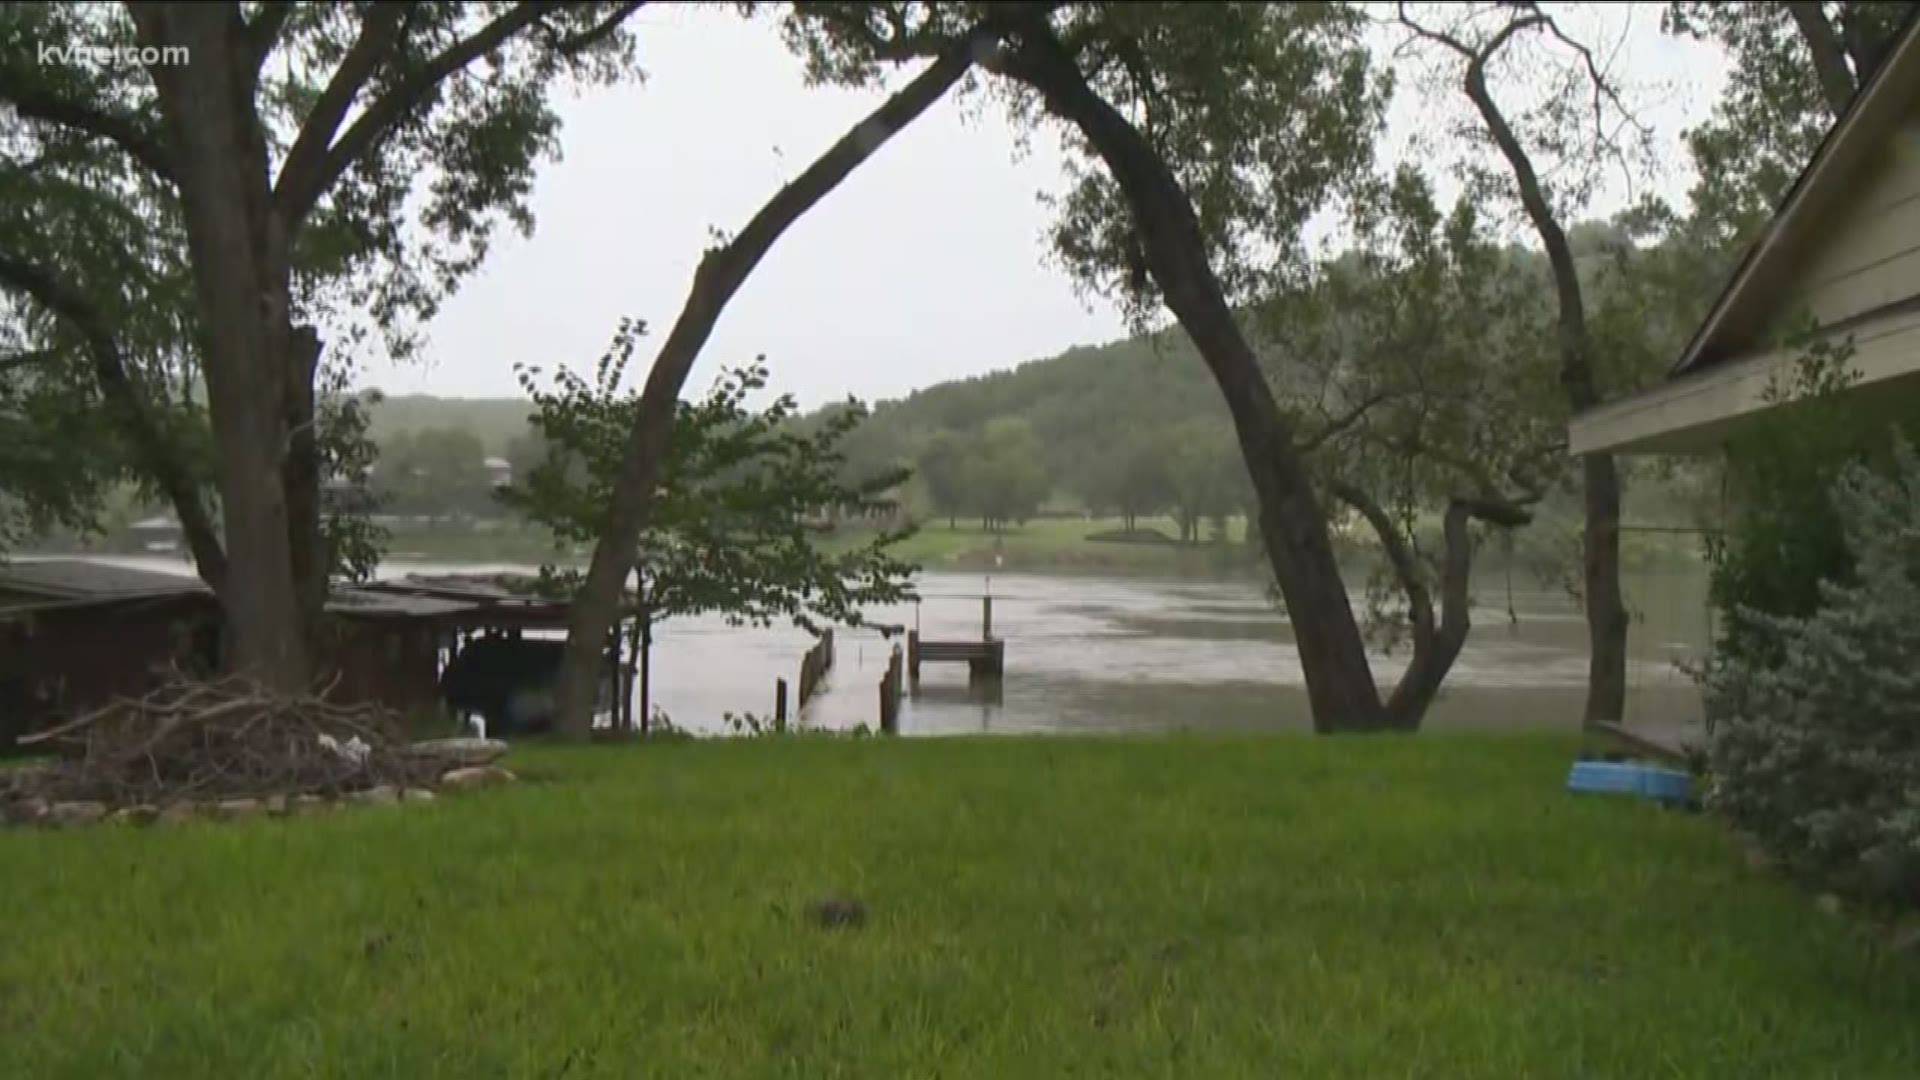 Lake Austin residents are worried about their boats and docks as the water continues to rise due to flooding.